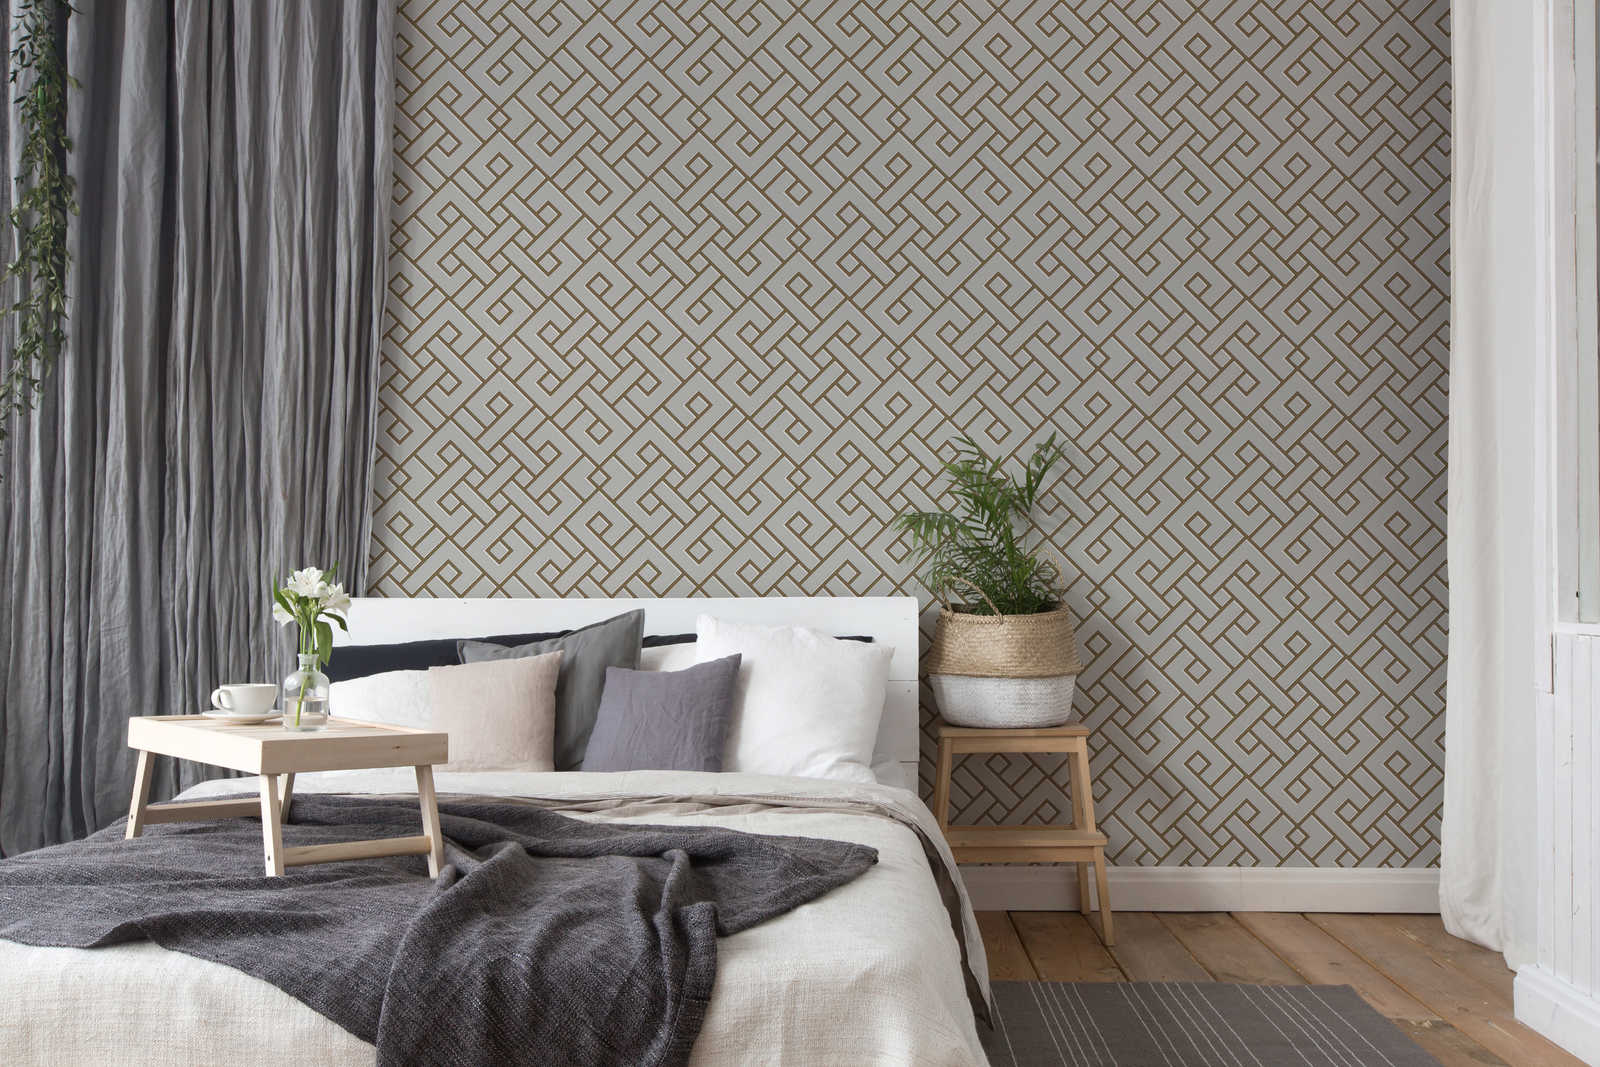             Wallpaper graphic design with 3D effect by MICHALSKY - grey, metallic
        